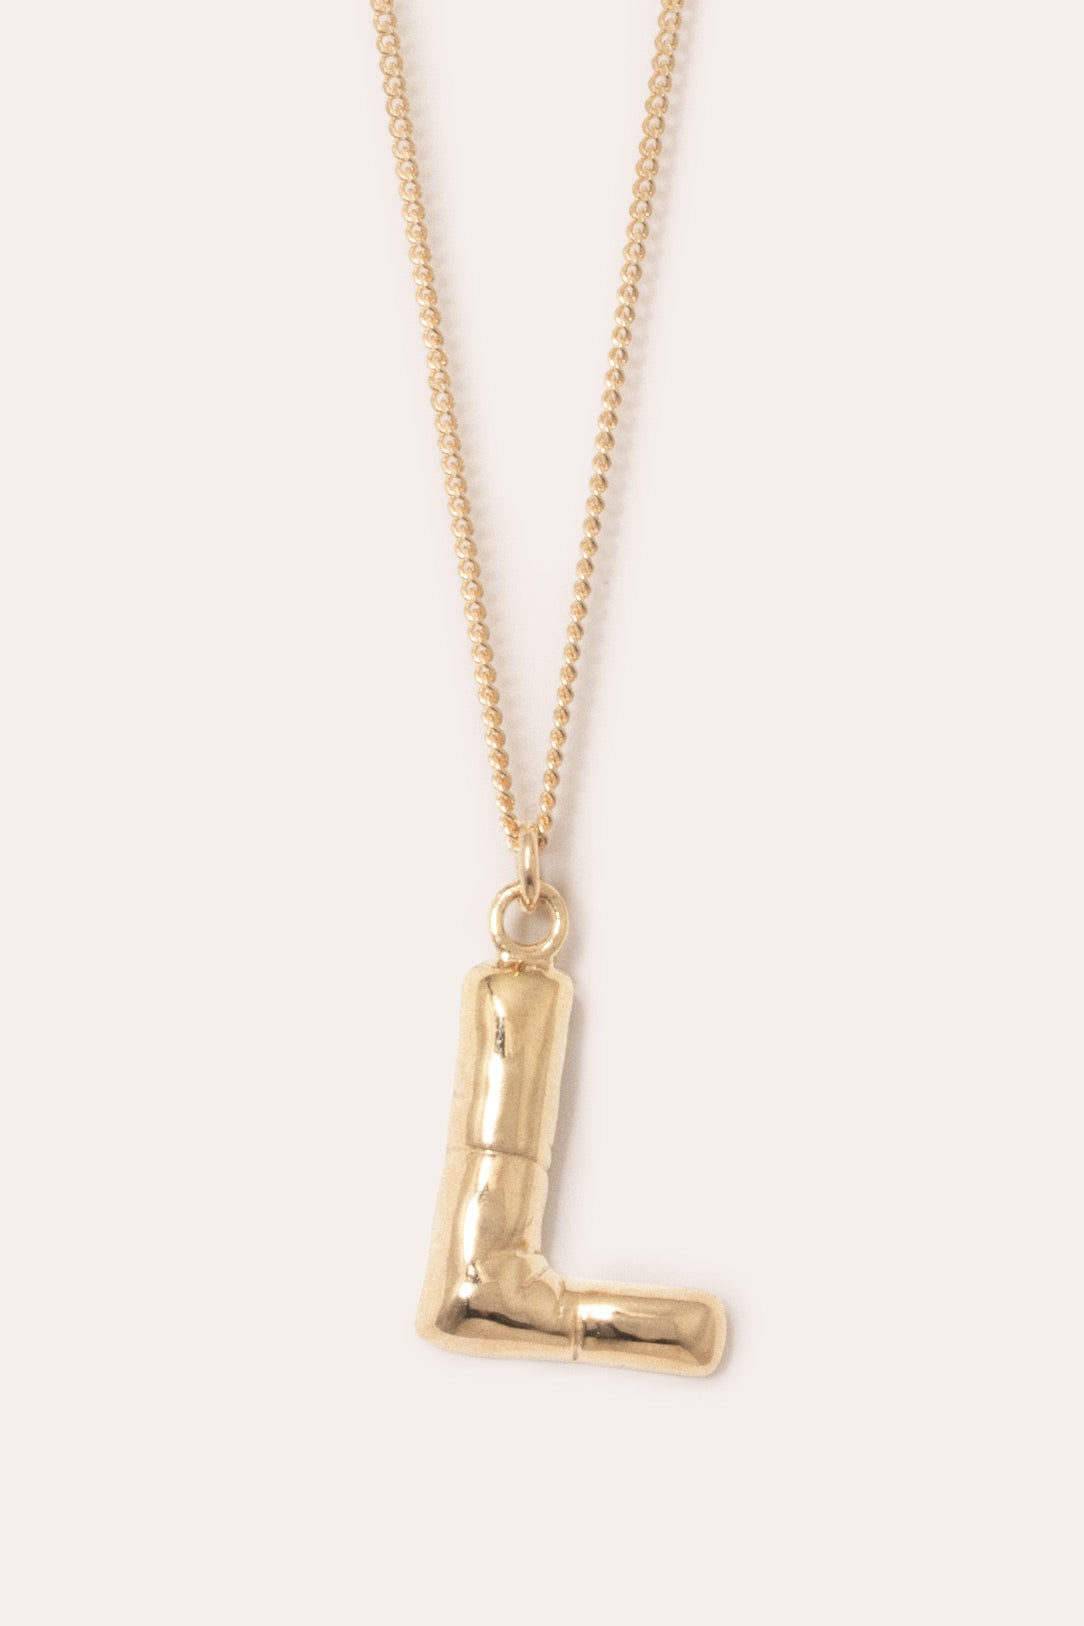 Gold Bold Letter Pendant and Chain Initial Necklace | Uncommon James